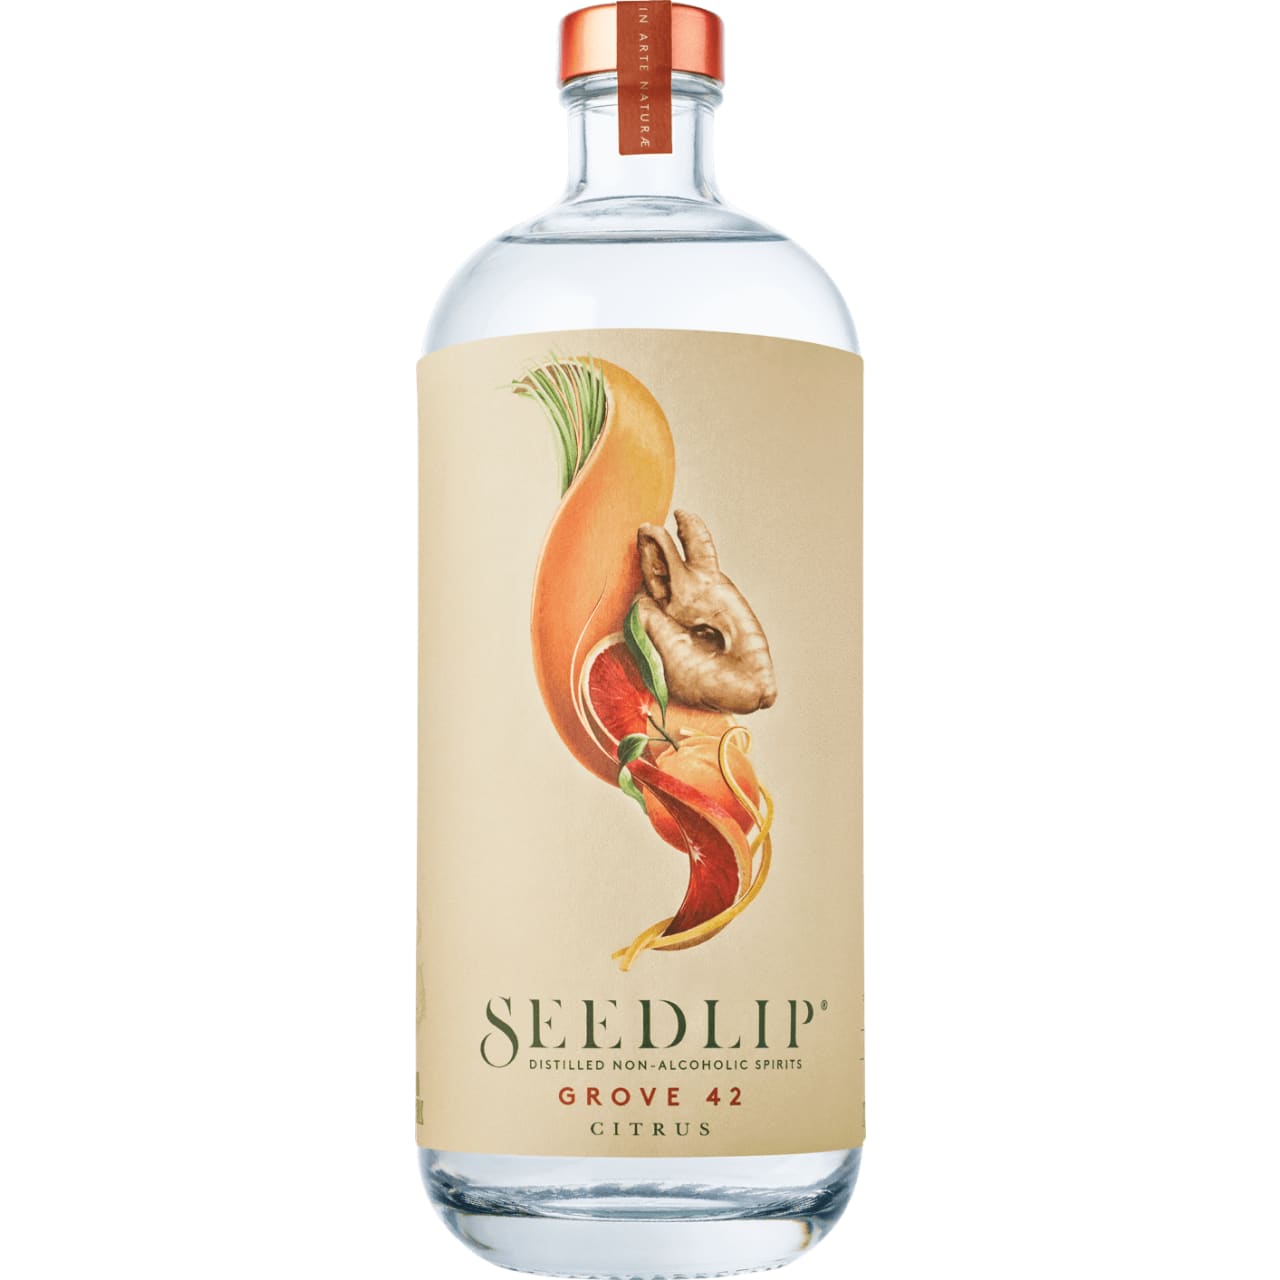 Seedlip is made from six carefully selected botanicals and spices, sourced from around the world and distilled in copper pot stills.